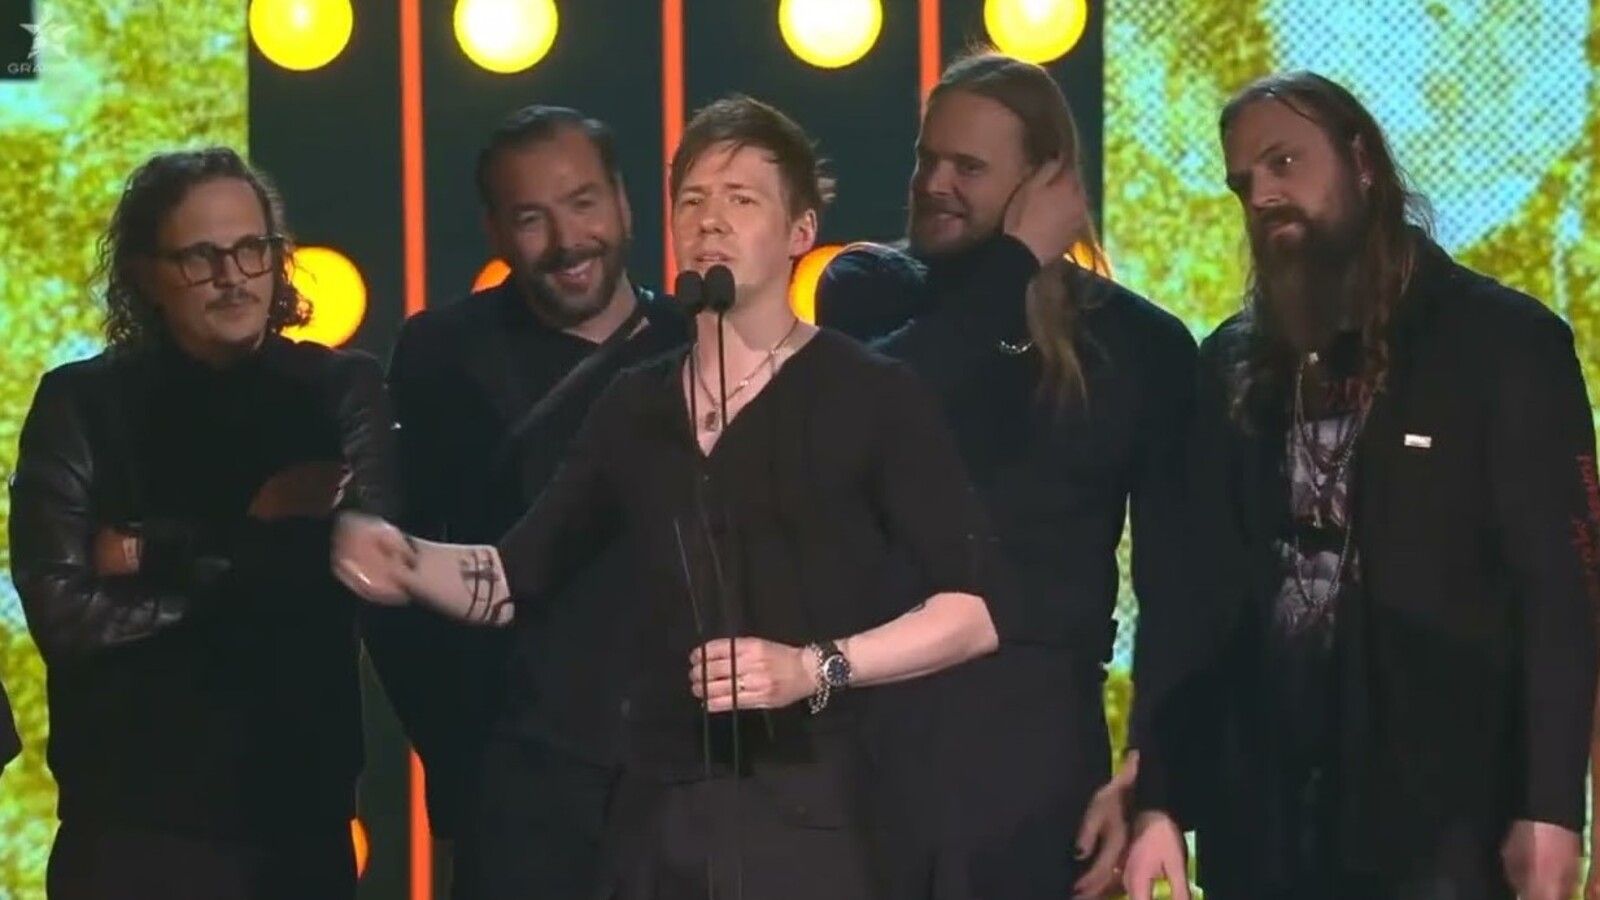 "I'm gonna be way too drunk" See GHOST's Tobias accept Swedish